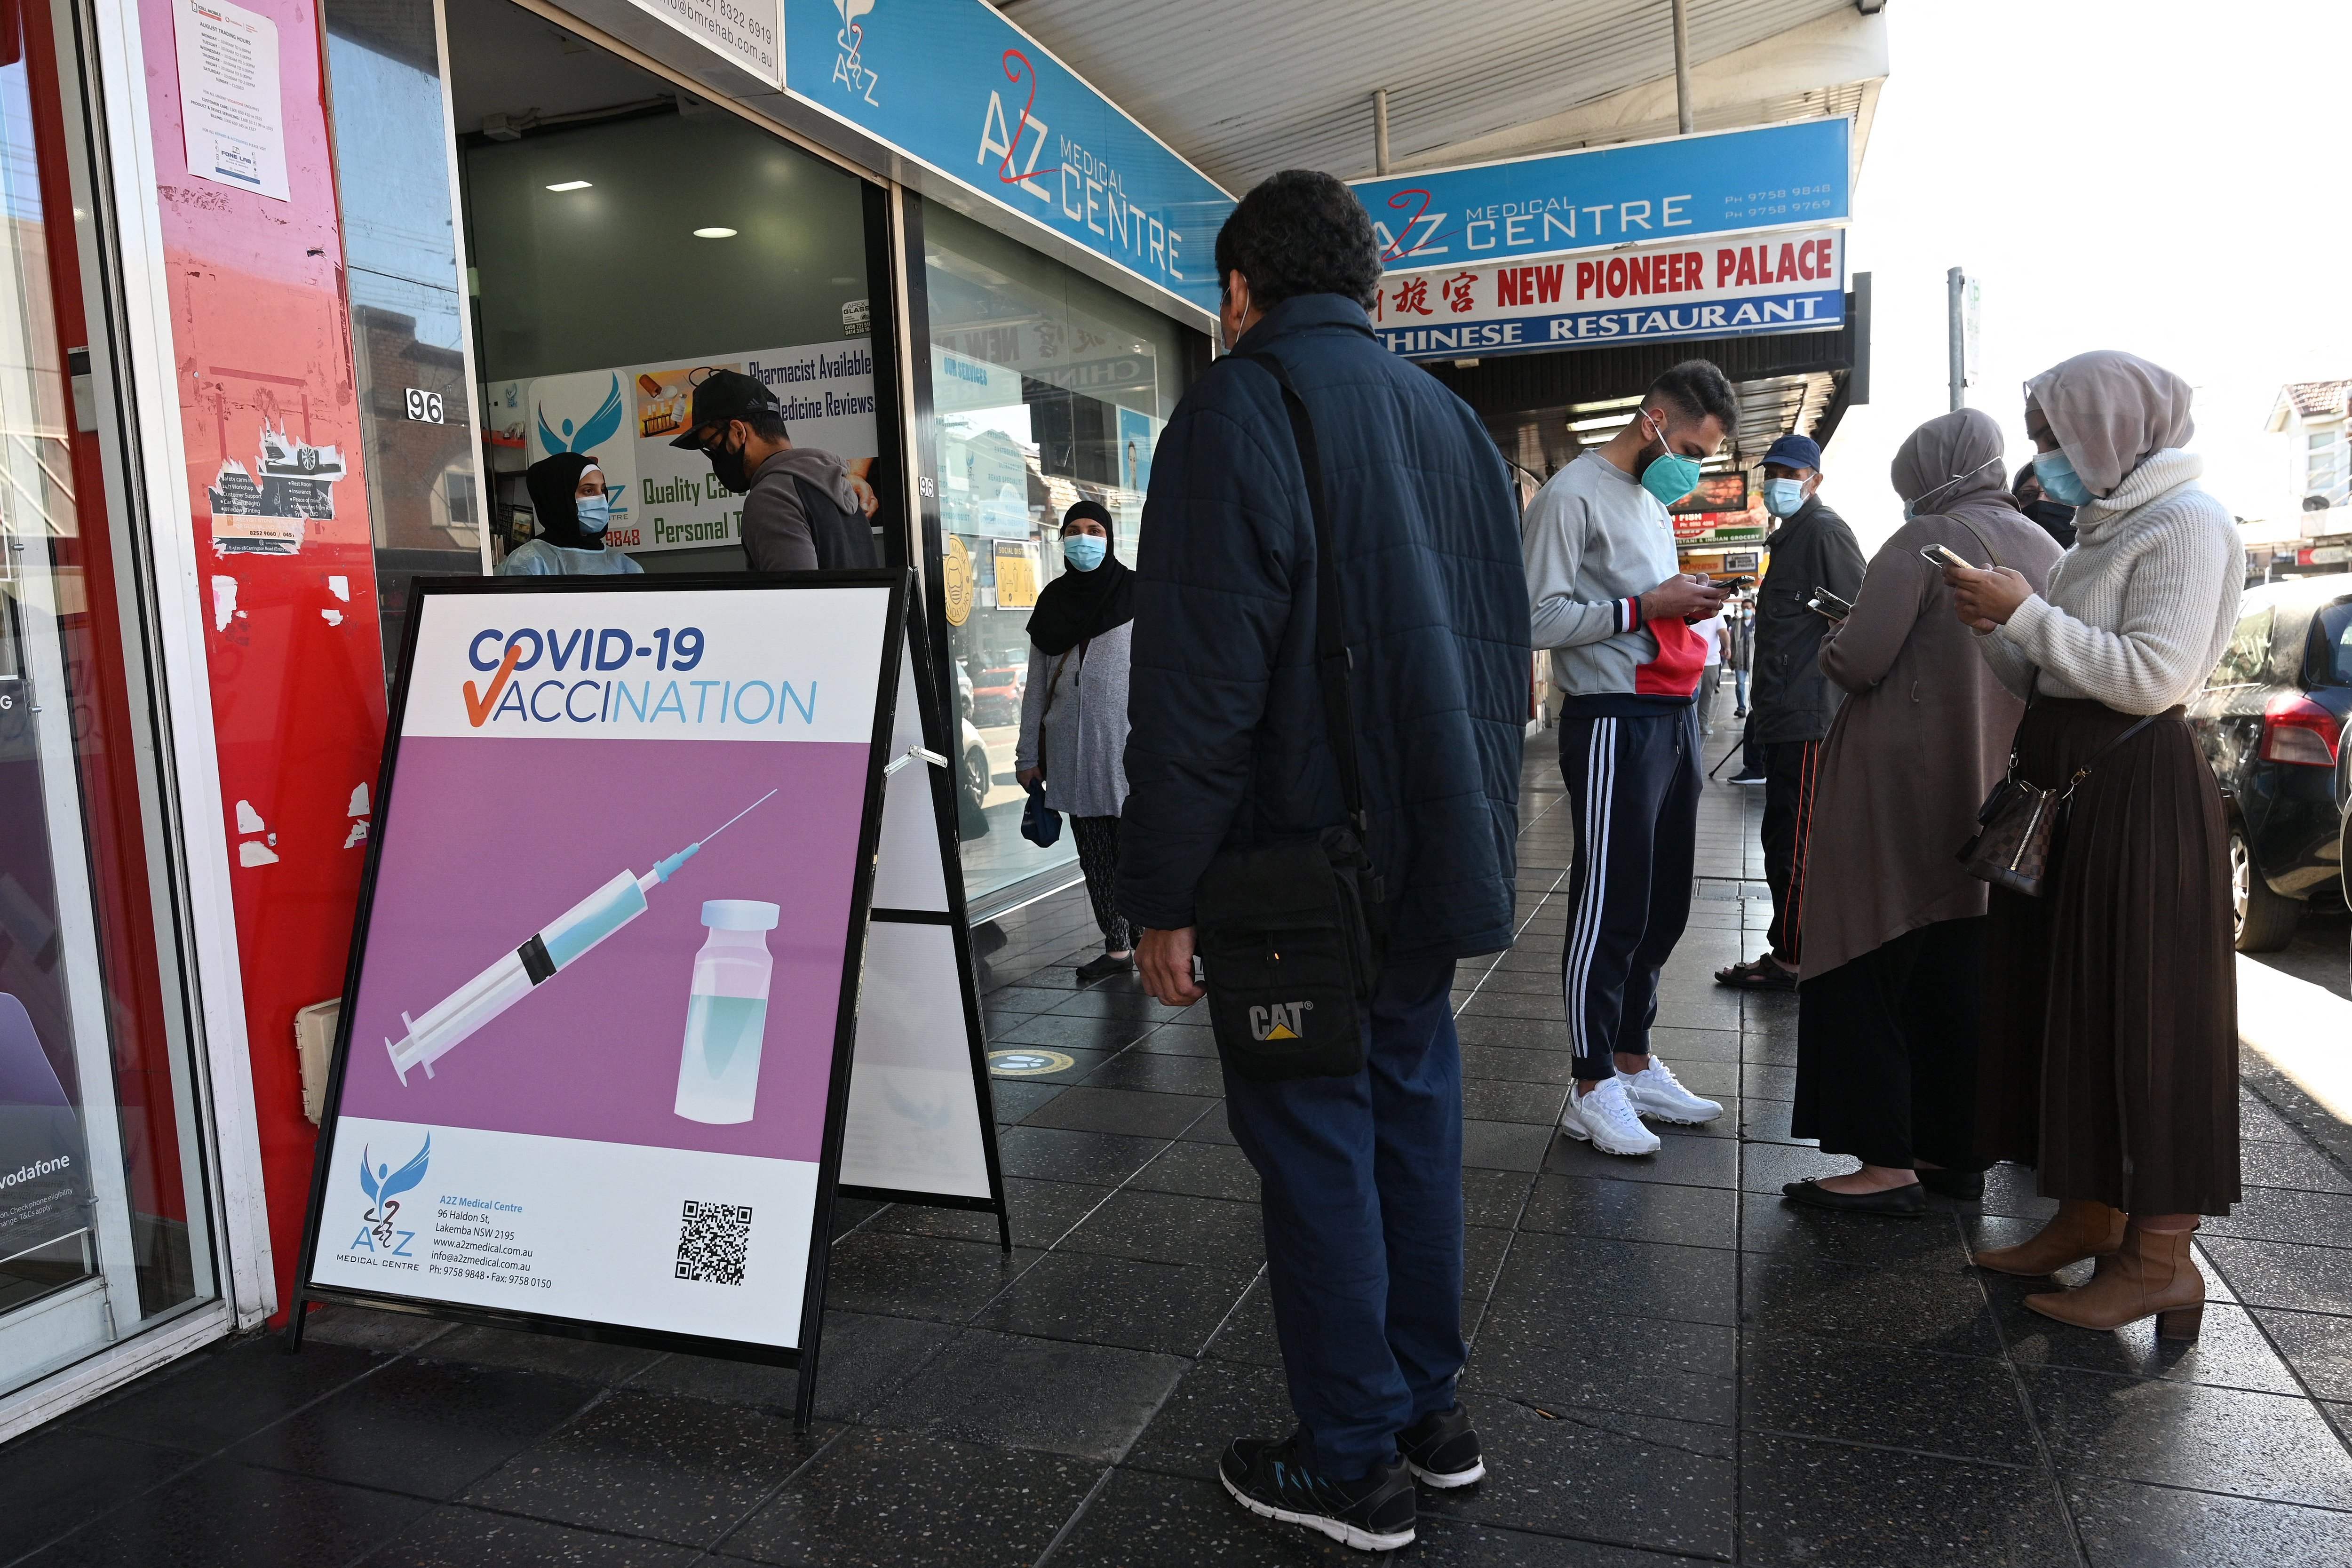 Residents queue up outside a pharmacy for a Covid-19 vaccination in western Sydney